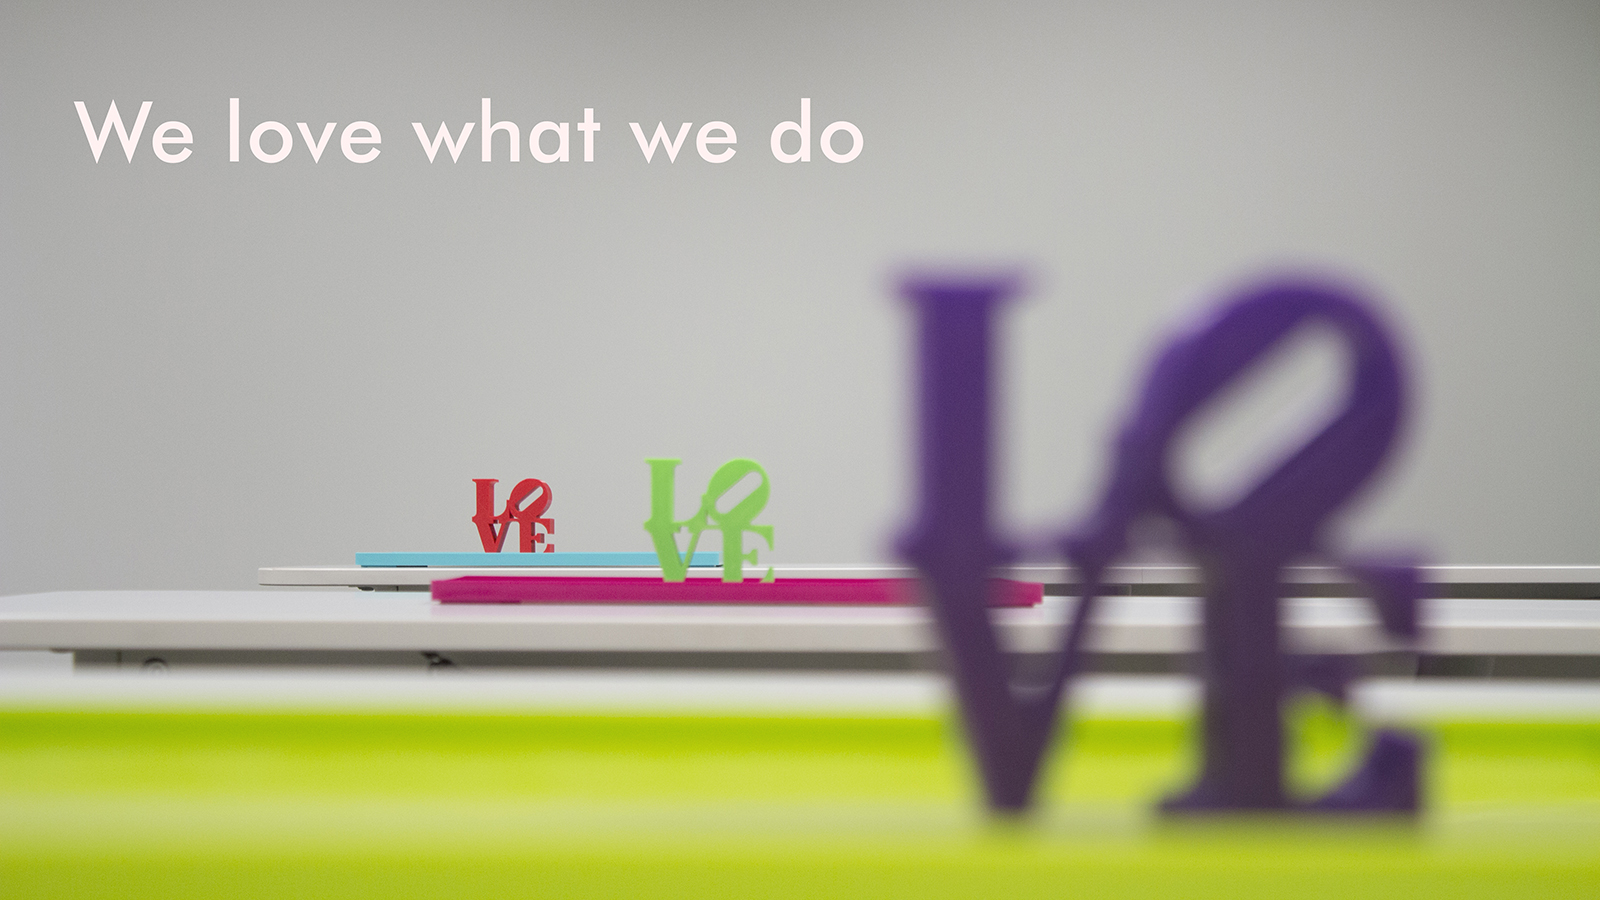 Header Image. We love what we do